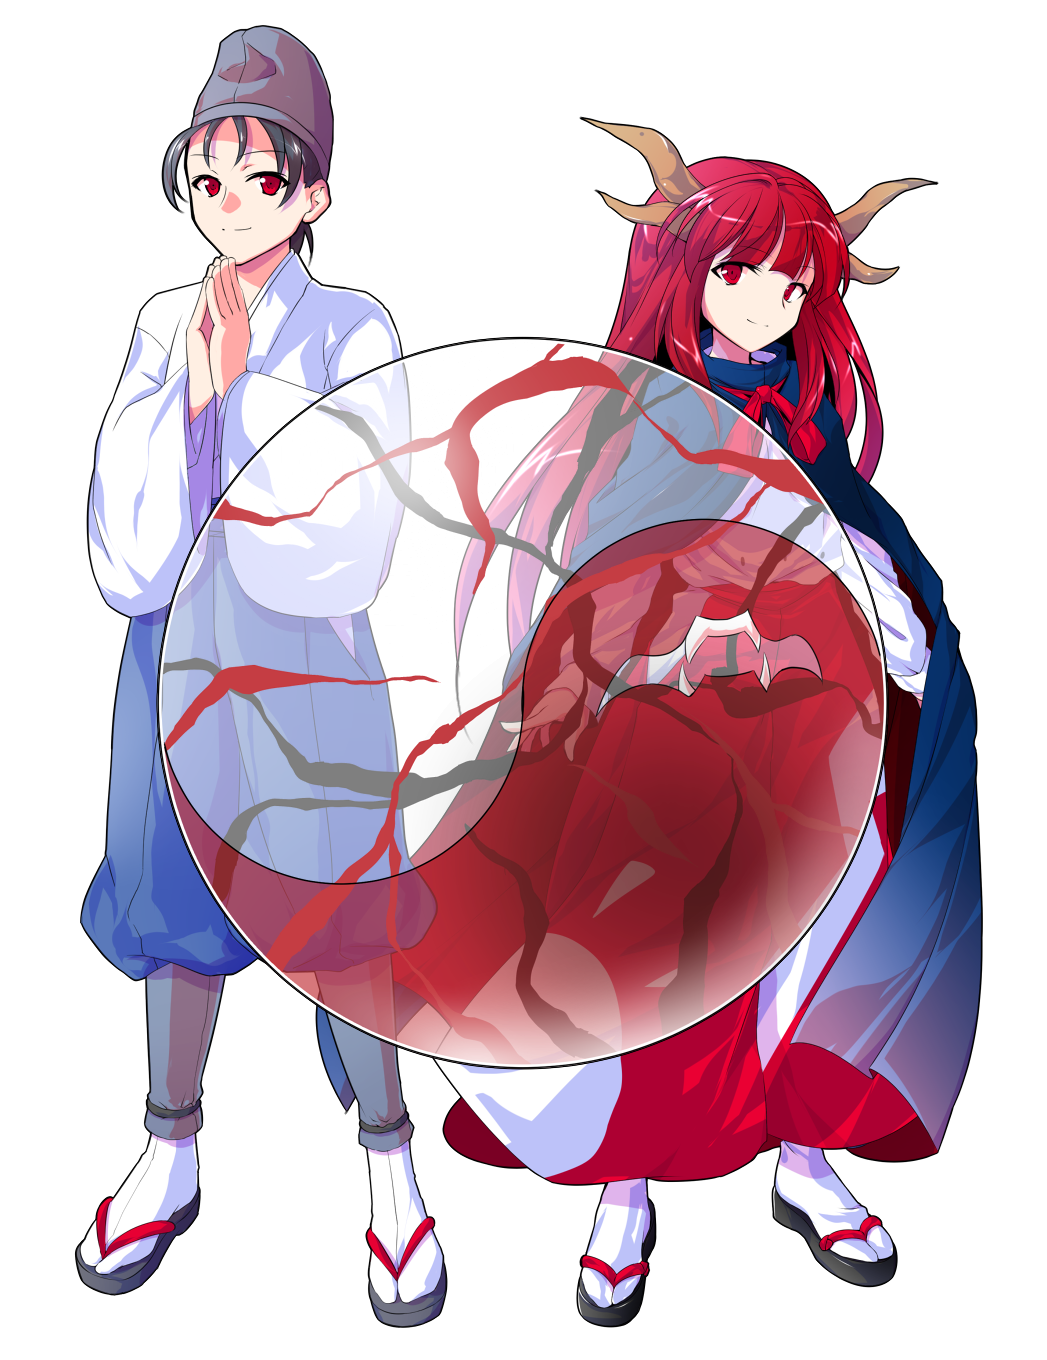 1boy 1girl alphes_(style) bangs black_hair blue_cape blue_hat blue_pants cape closed_mouth dairi eyebrows eyebrows_visible_through_hair full_body hands_together haori hat highres horns japanese_clothes legs_apart long_hair long_sleeves pants parody red_eyes red_pants red_ribbon redhead ribbon see-through shingyoku shingyoku_(male) shirt short_hair simple_background smile standing straight_hair style_parody tabi tate_eboshi touhou transparent_background white_legwear white_shirt wide_sleeves yin_yang